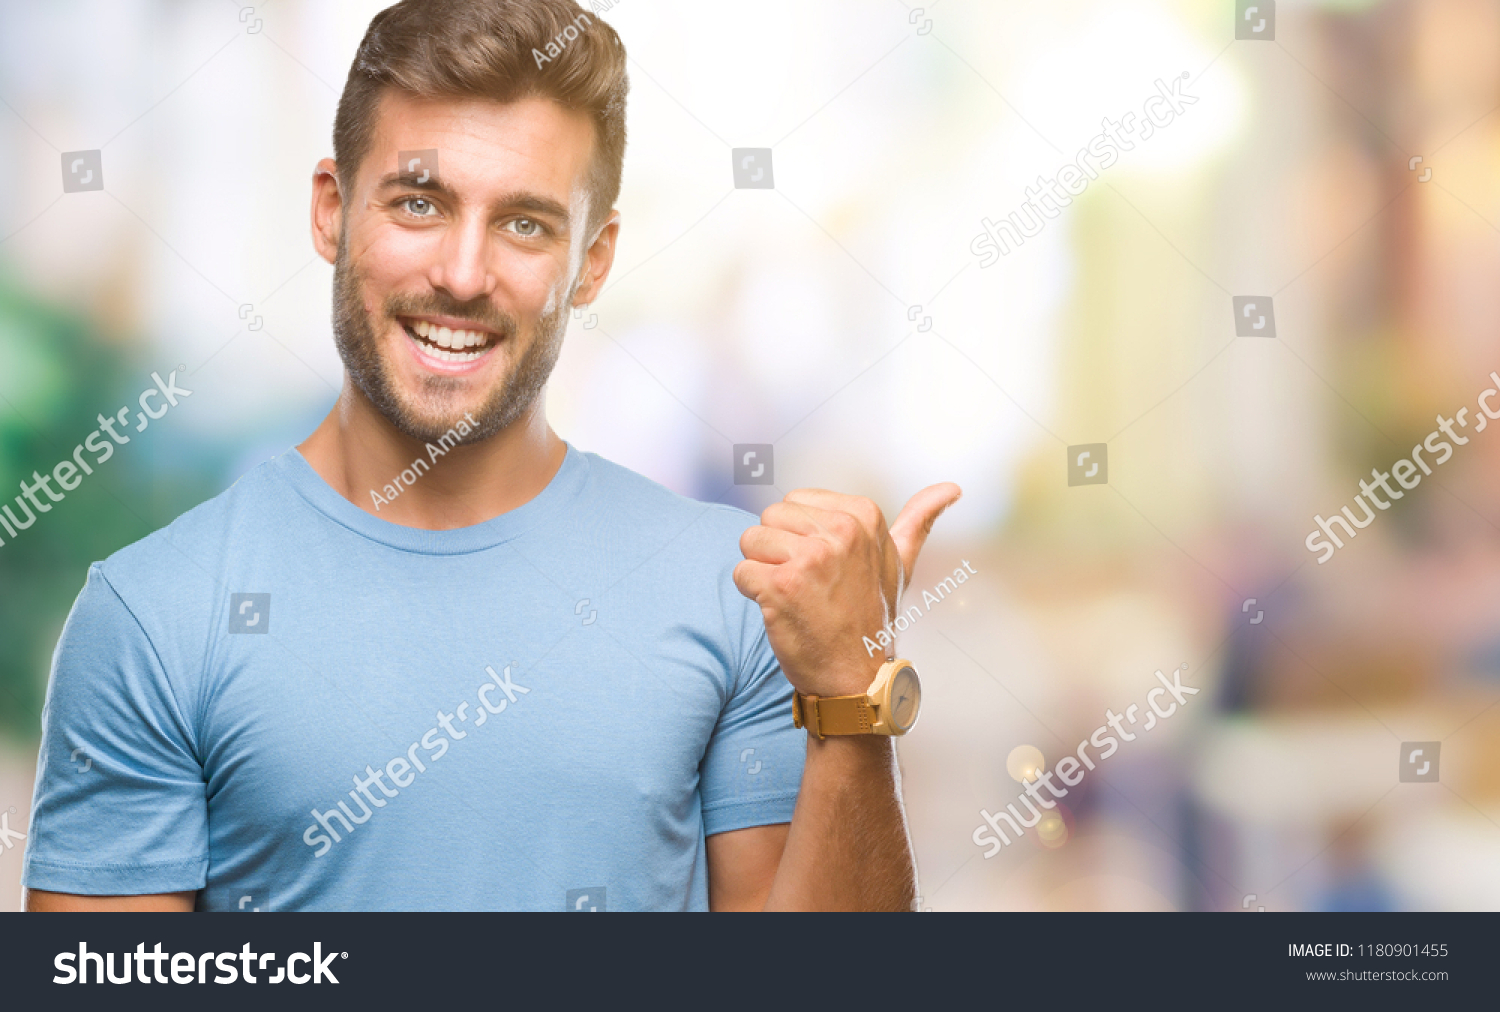 Young handsome man over isolated background smiling with happy face looking and pointing to the side with thumb up. #1180901455